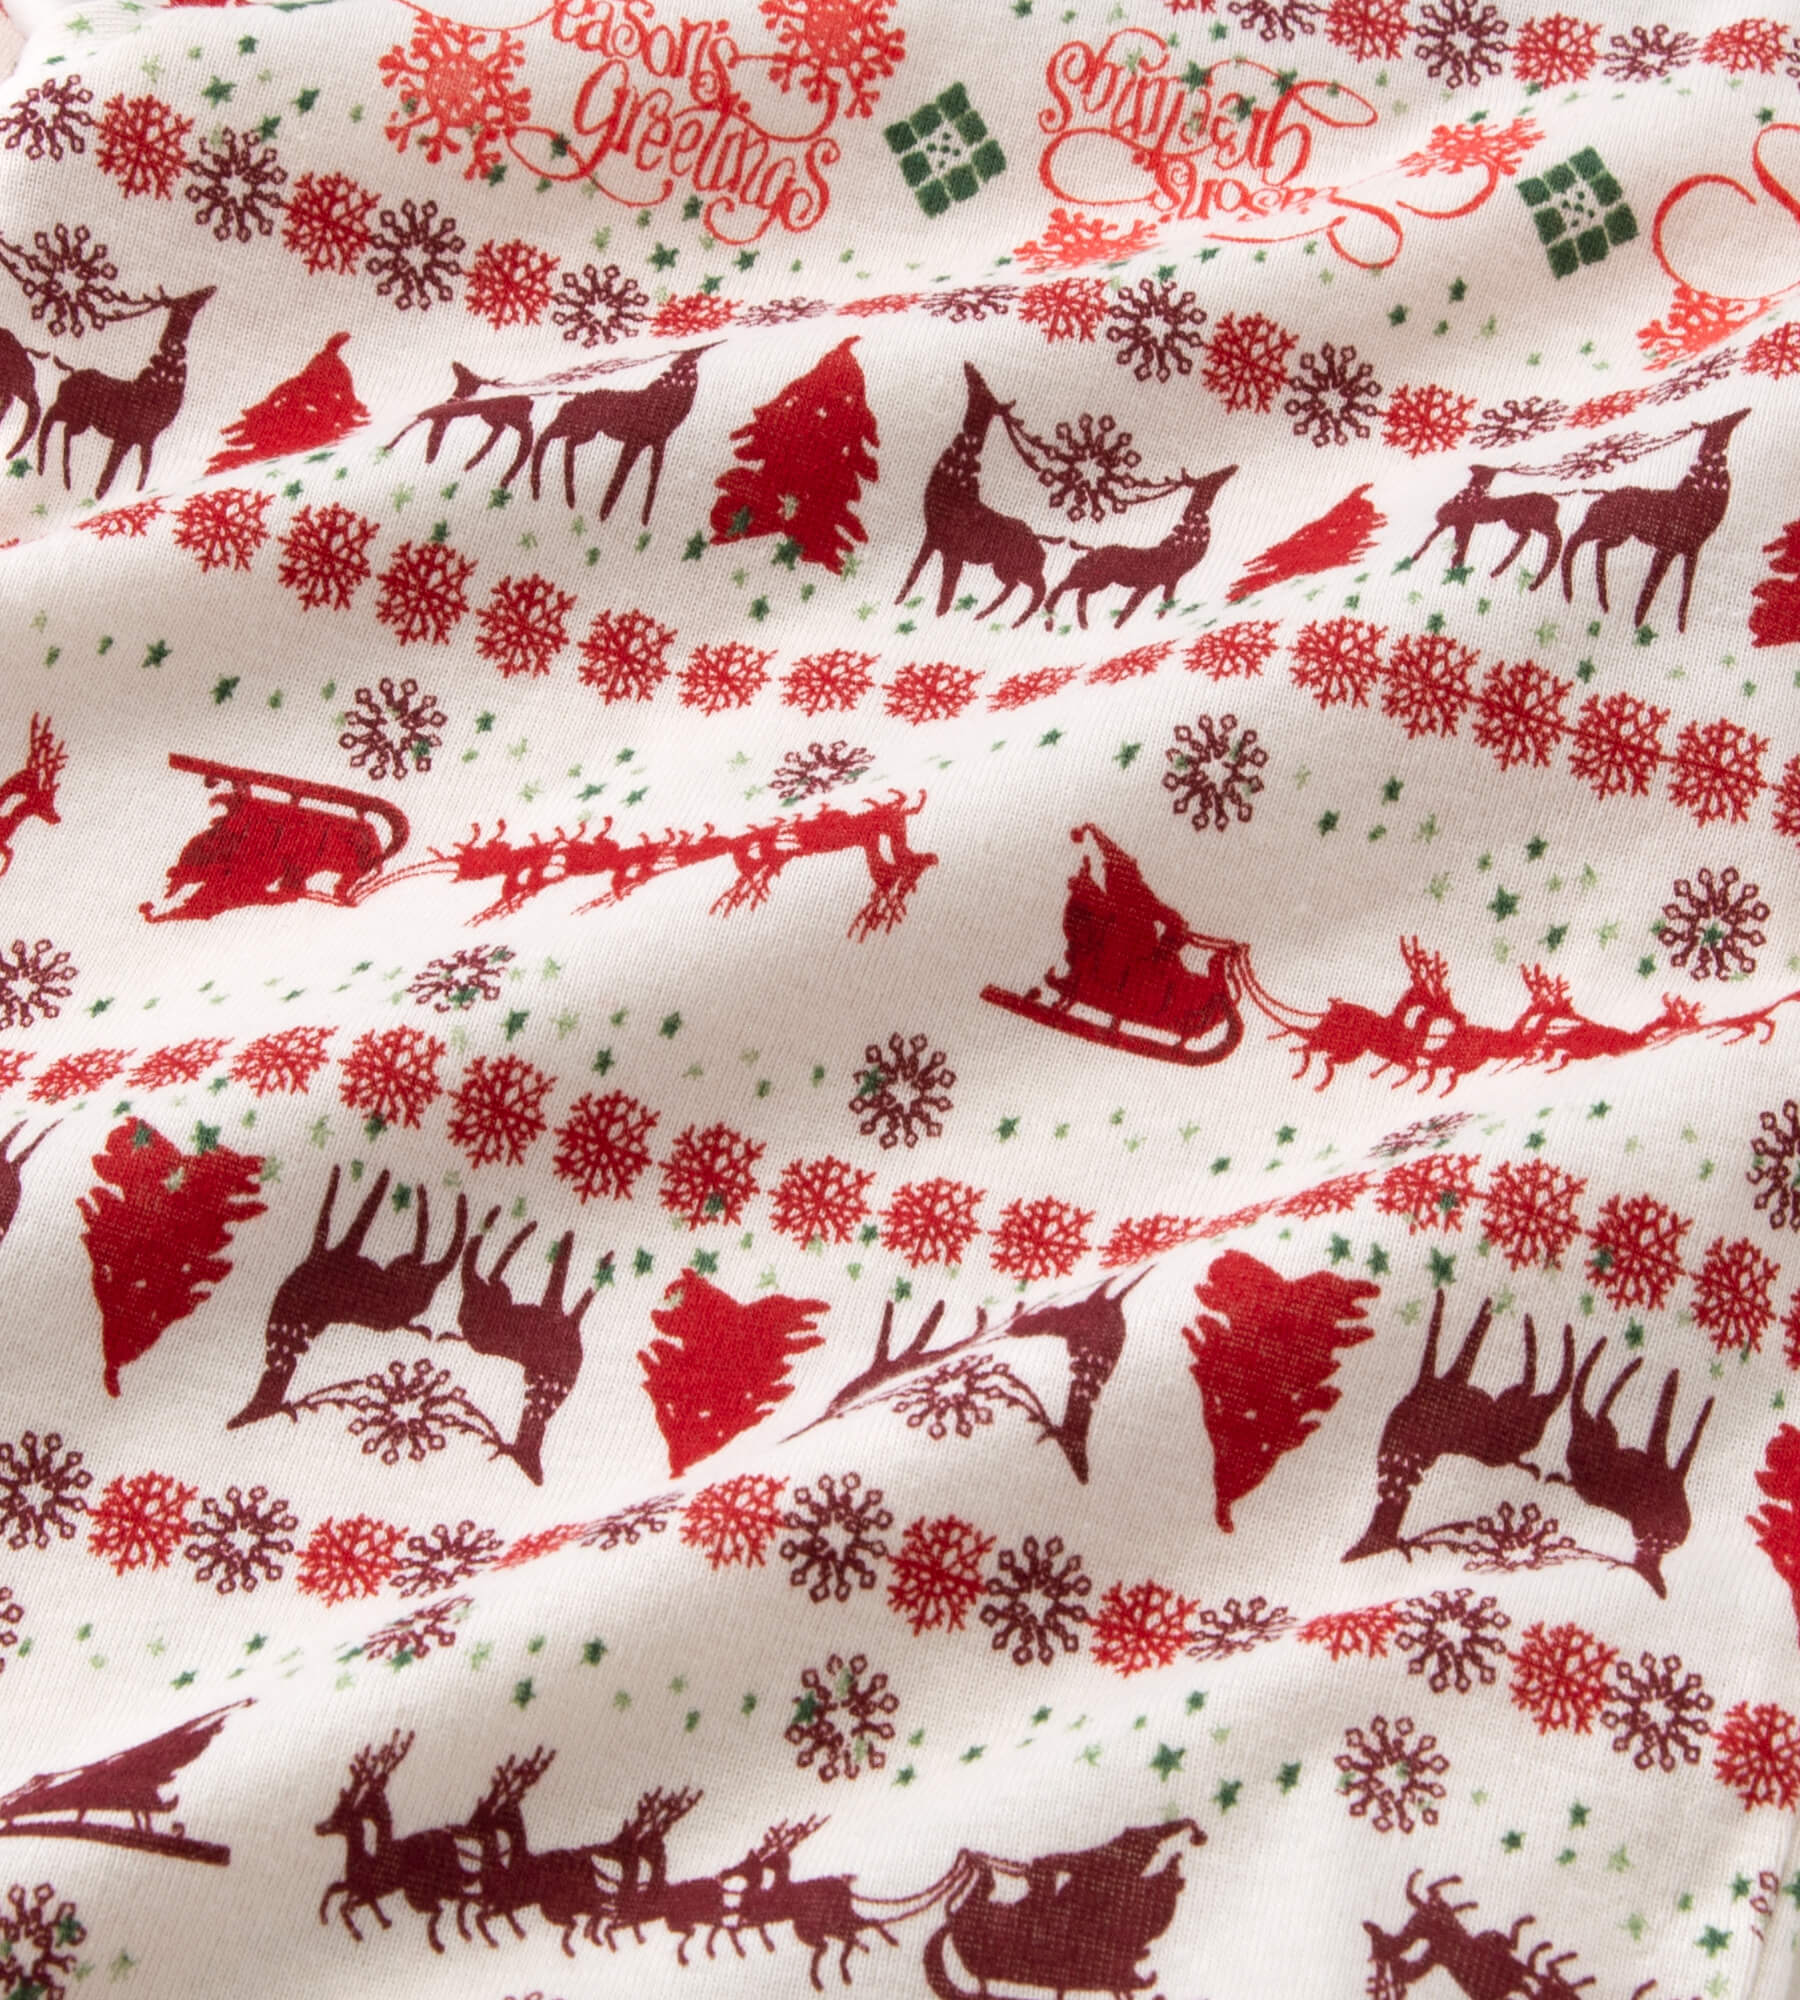 Spread holiday cheer in this classic Christmas pajama!